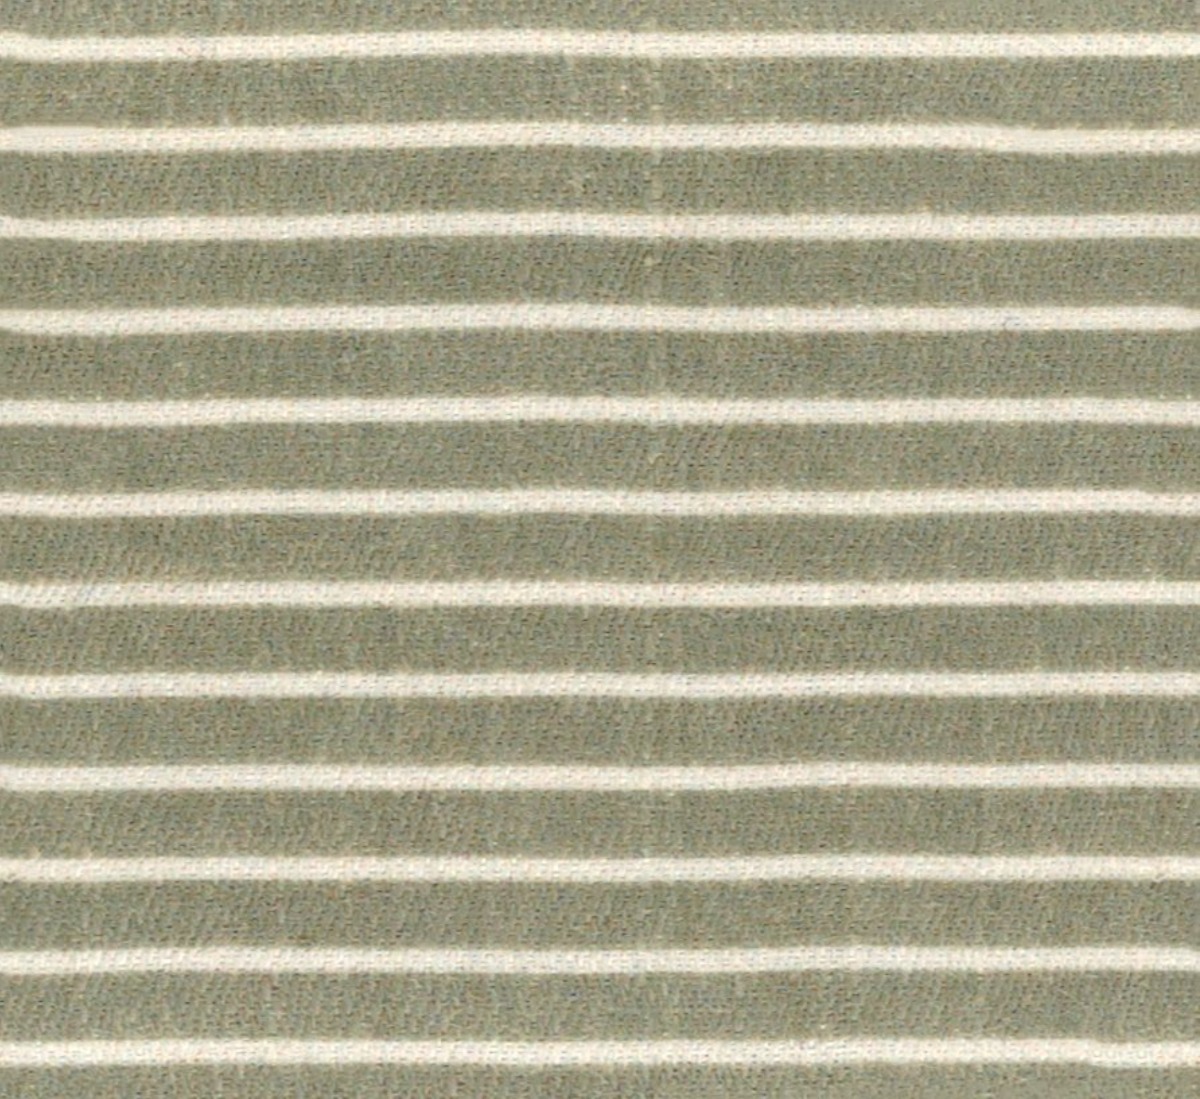 A seamless fabric texture with olive green striped textile units arranged in a None pattern